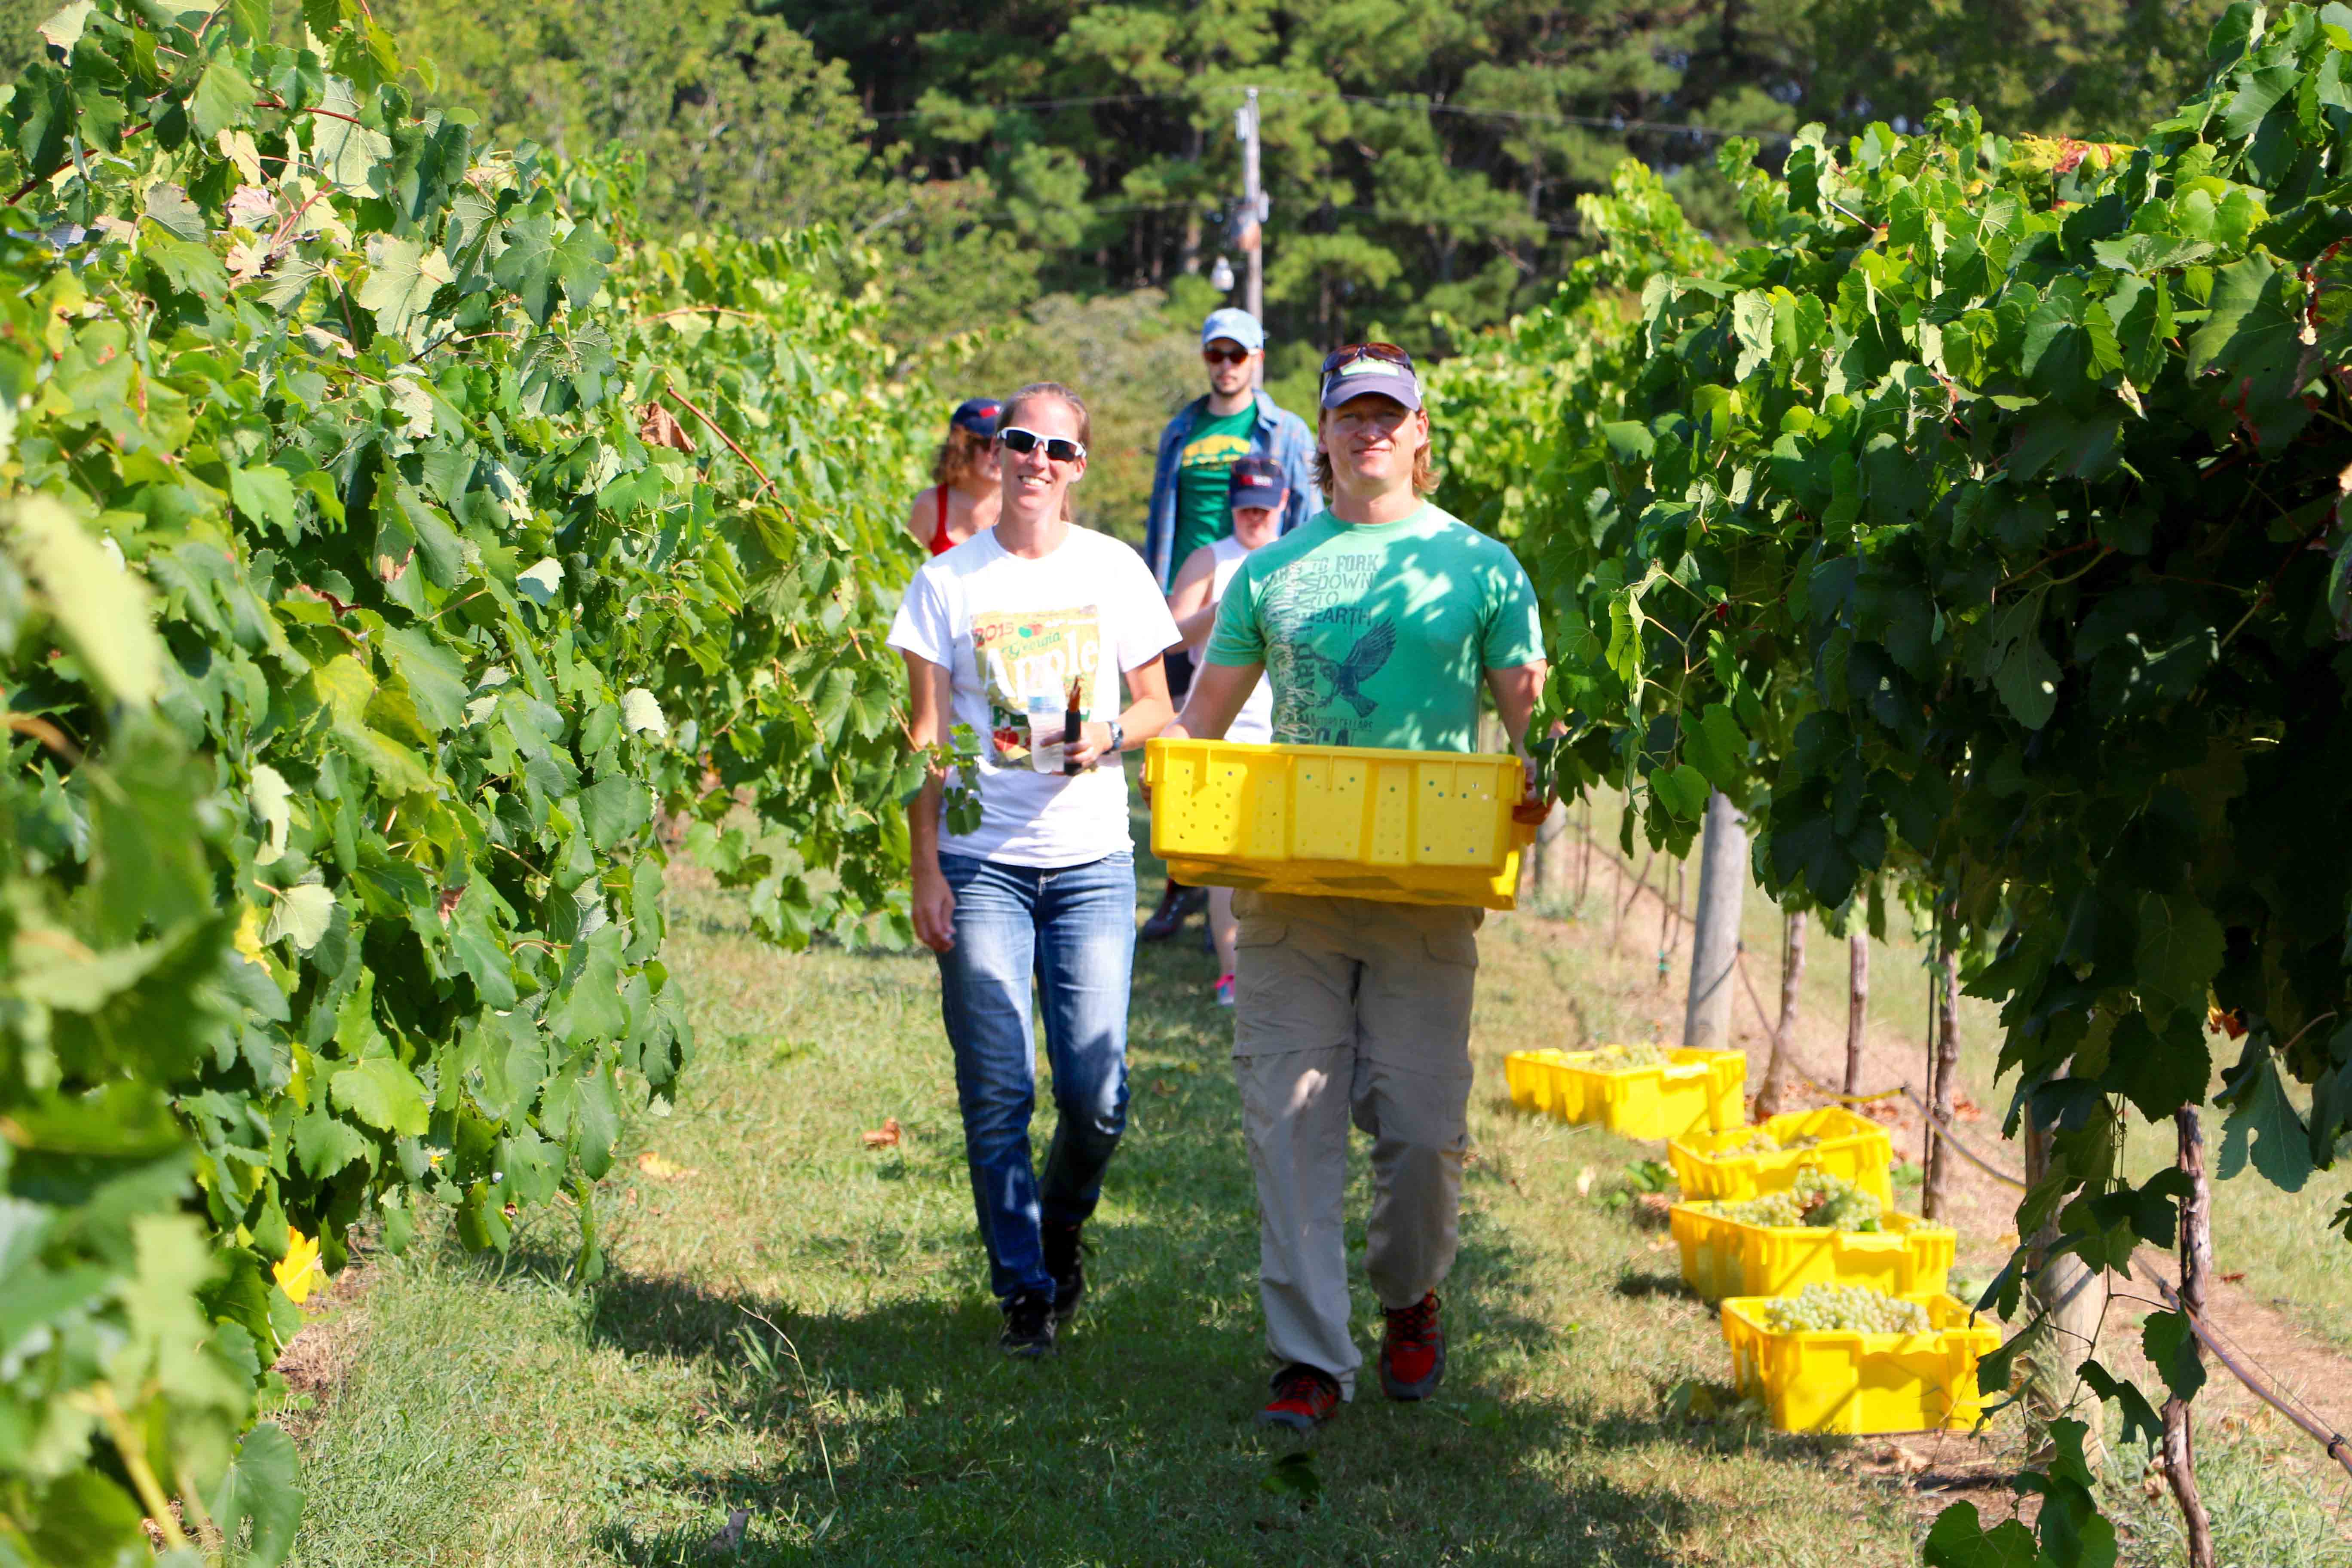 Texas-based viticulture consultant Fritz Westover, Carroll County Master Gardener Laura Davis, and staff members from the UGA Soil, Plant and Water Analysis Laboratories in Athens, Georgia, harvest grapes at Trillium Vineyards in Haralson County.